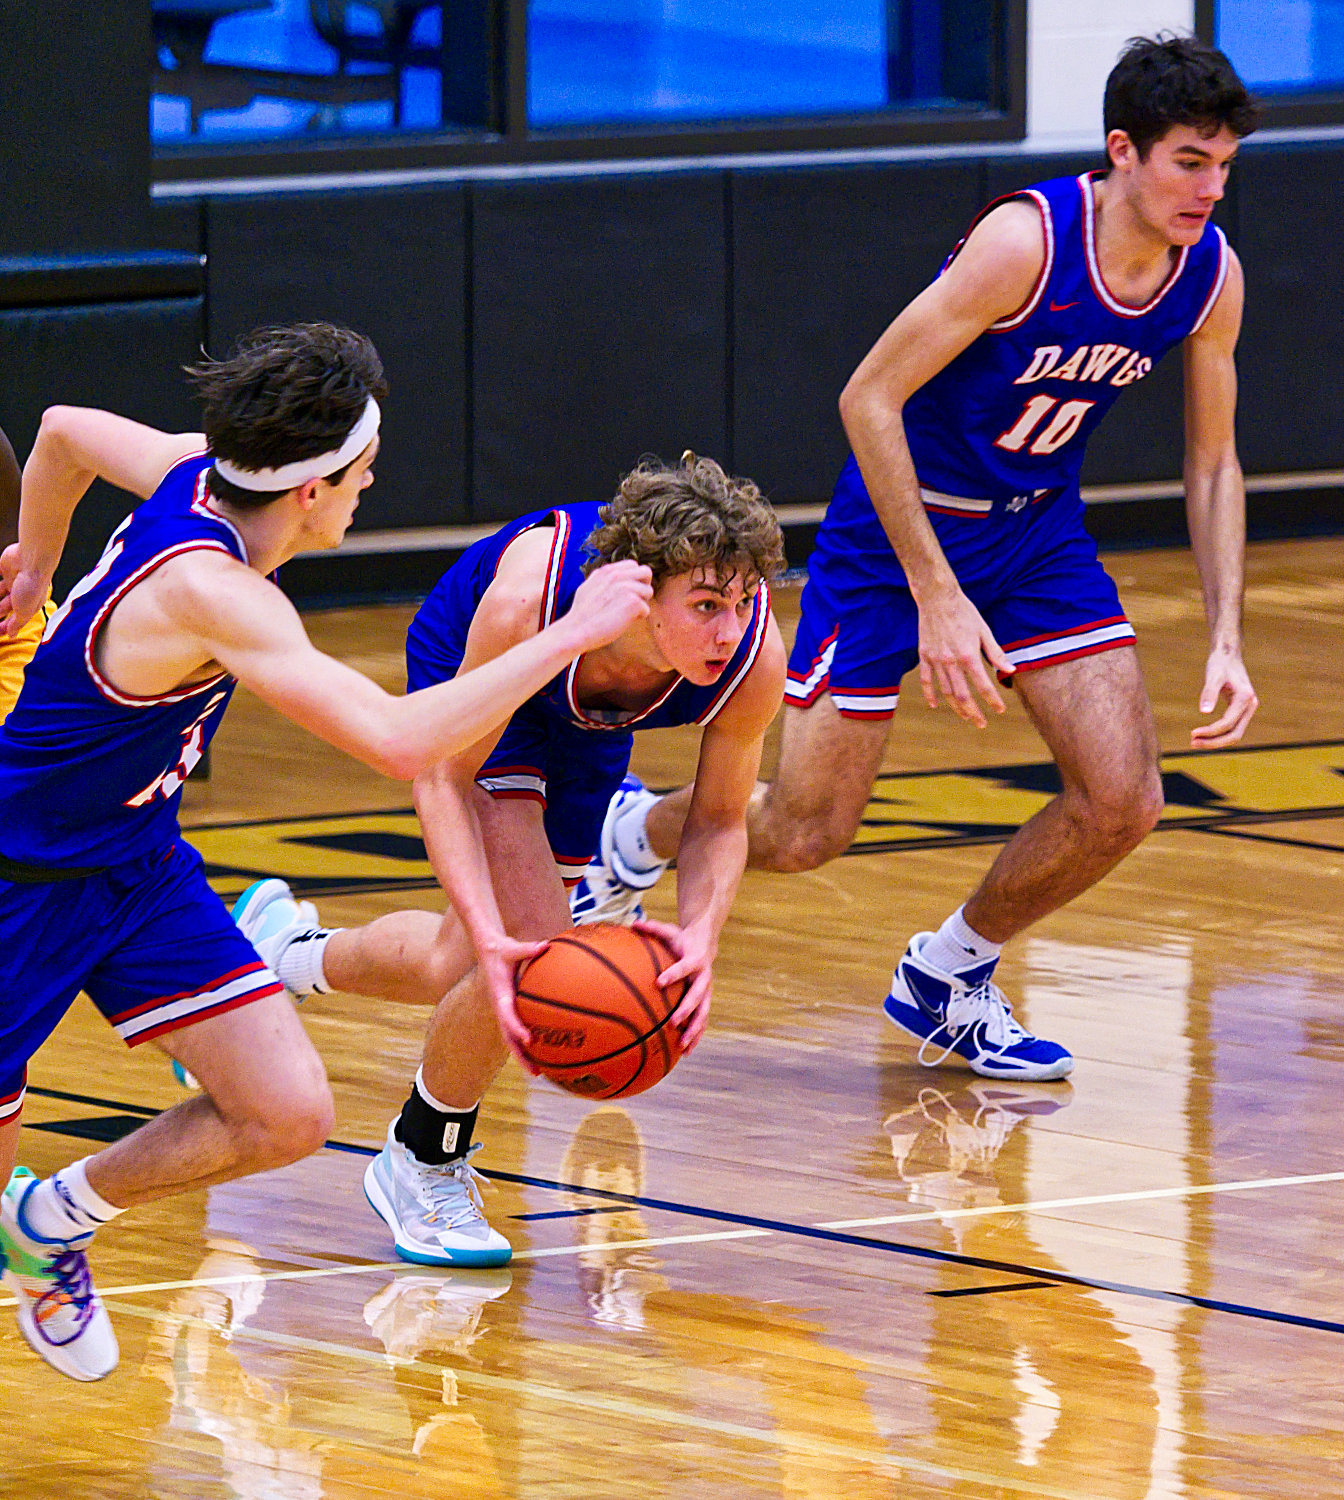 Brady Floyd starts the fast break flanked by Levi Thompson and Ethan Presley. [see more shots, buy basketball photos]